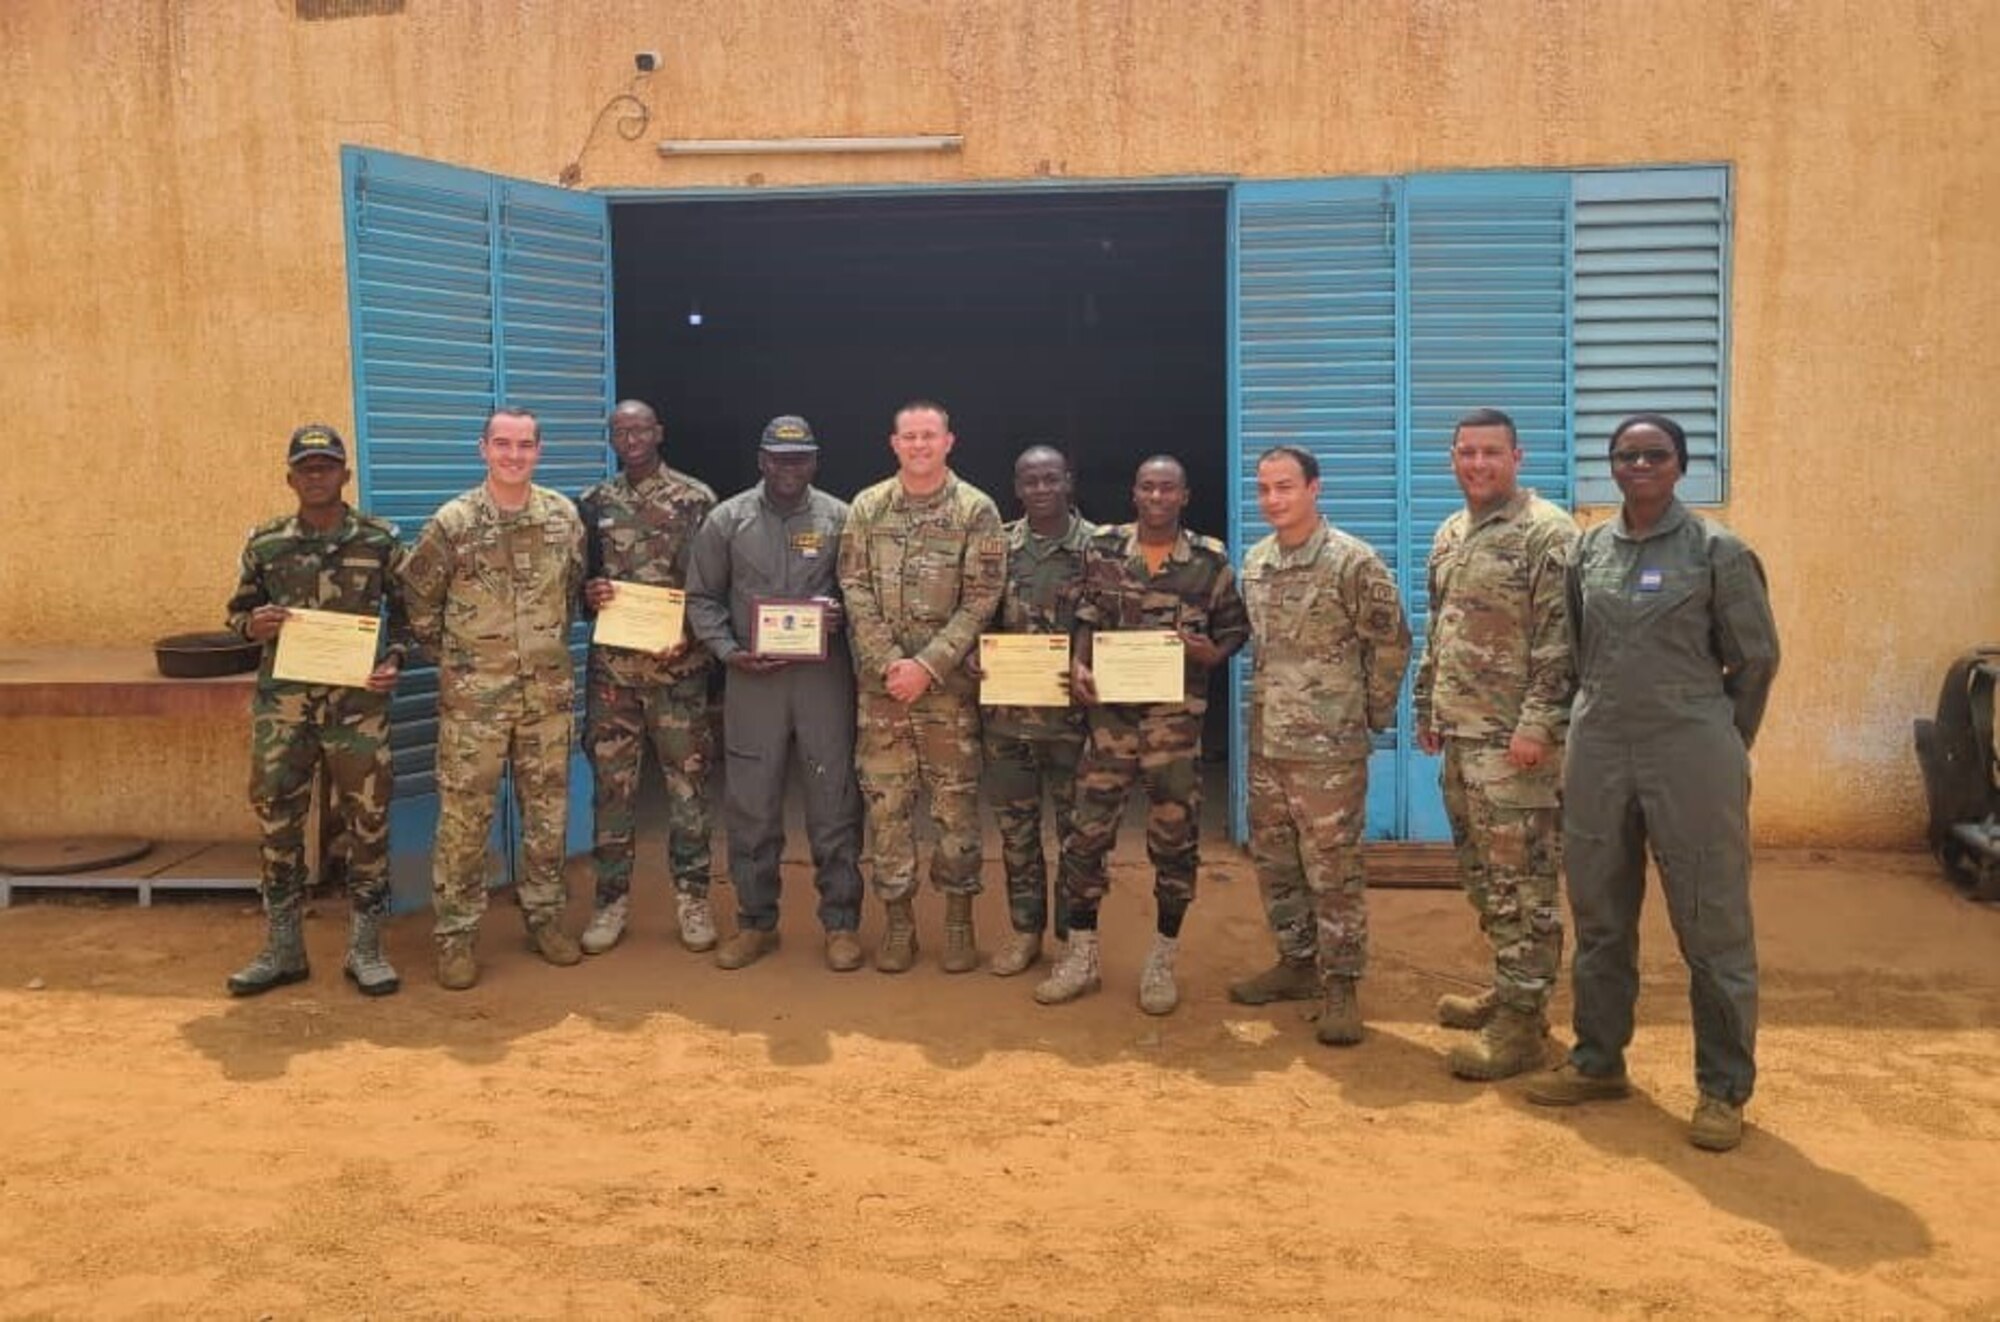 Airmen assigned to the 818th Mobility Support Advisory Squadron shared best practices with 58 aircraft maintainers in the Nigerien Air Force regarding their C-130 program.